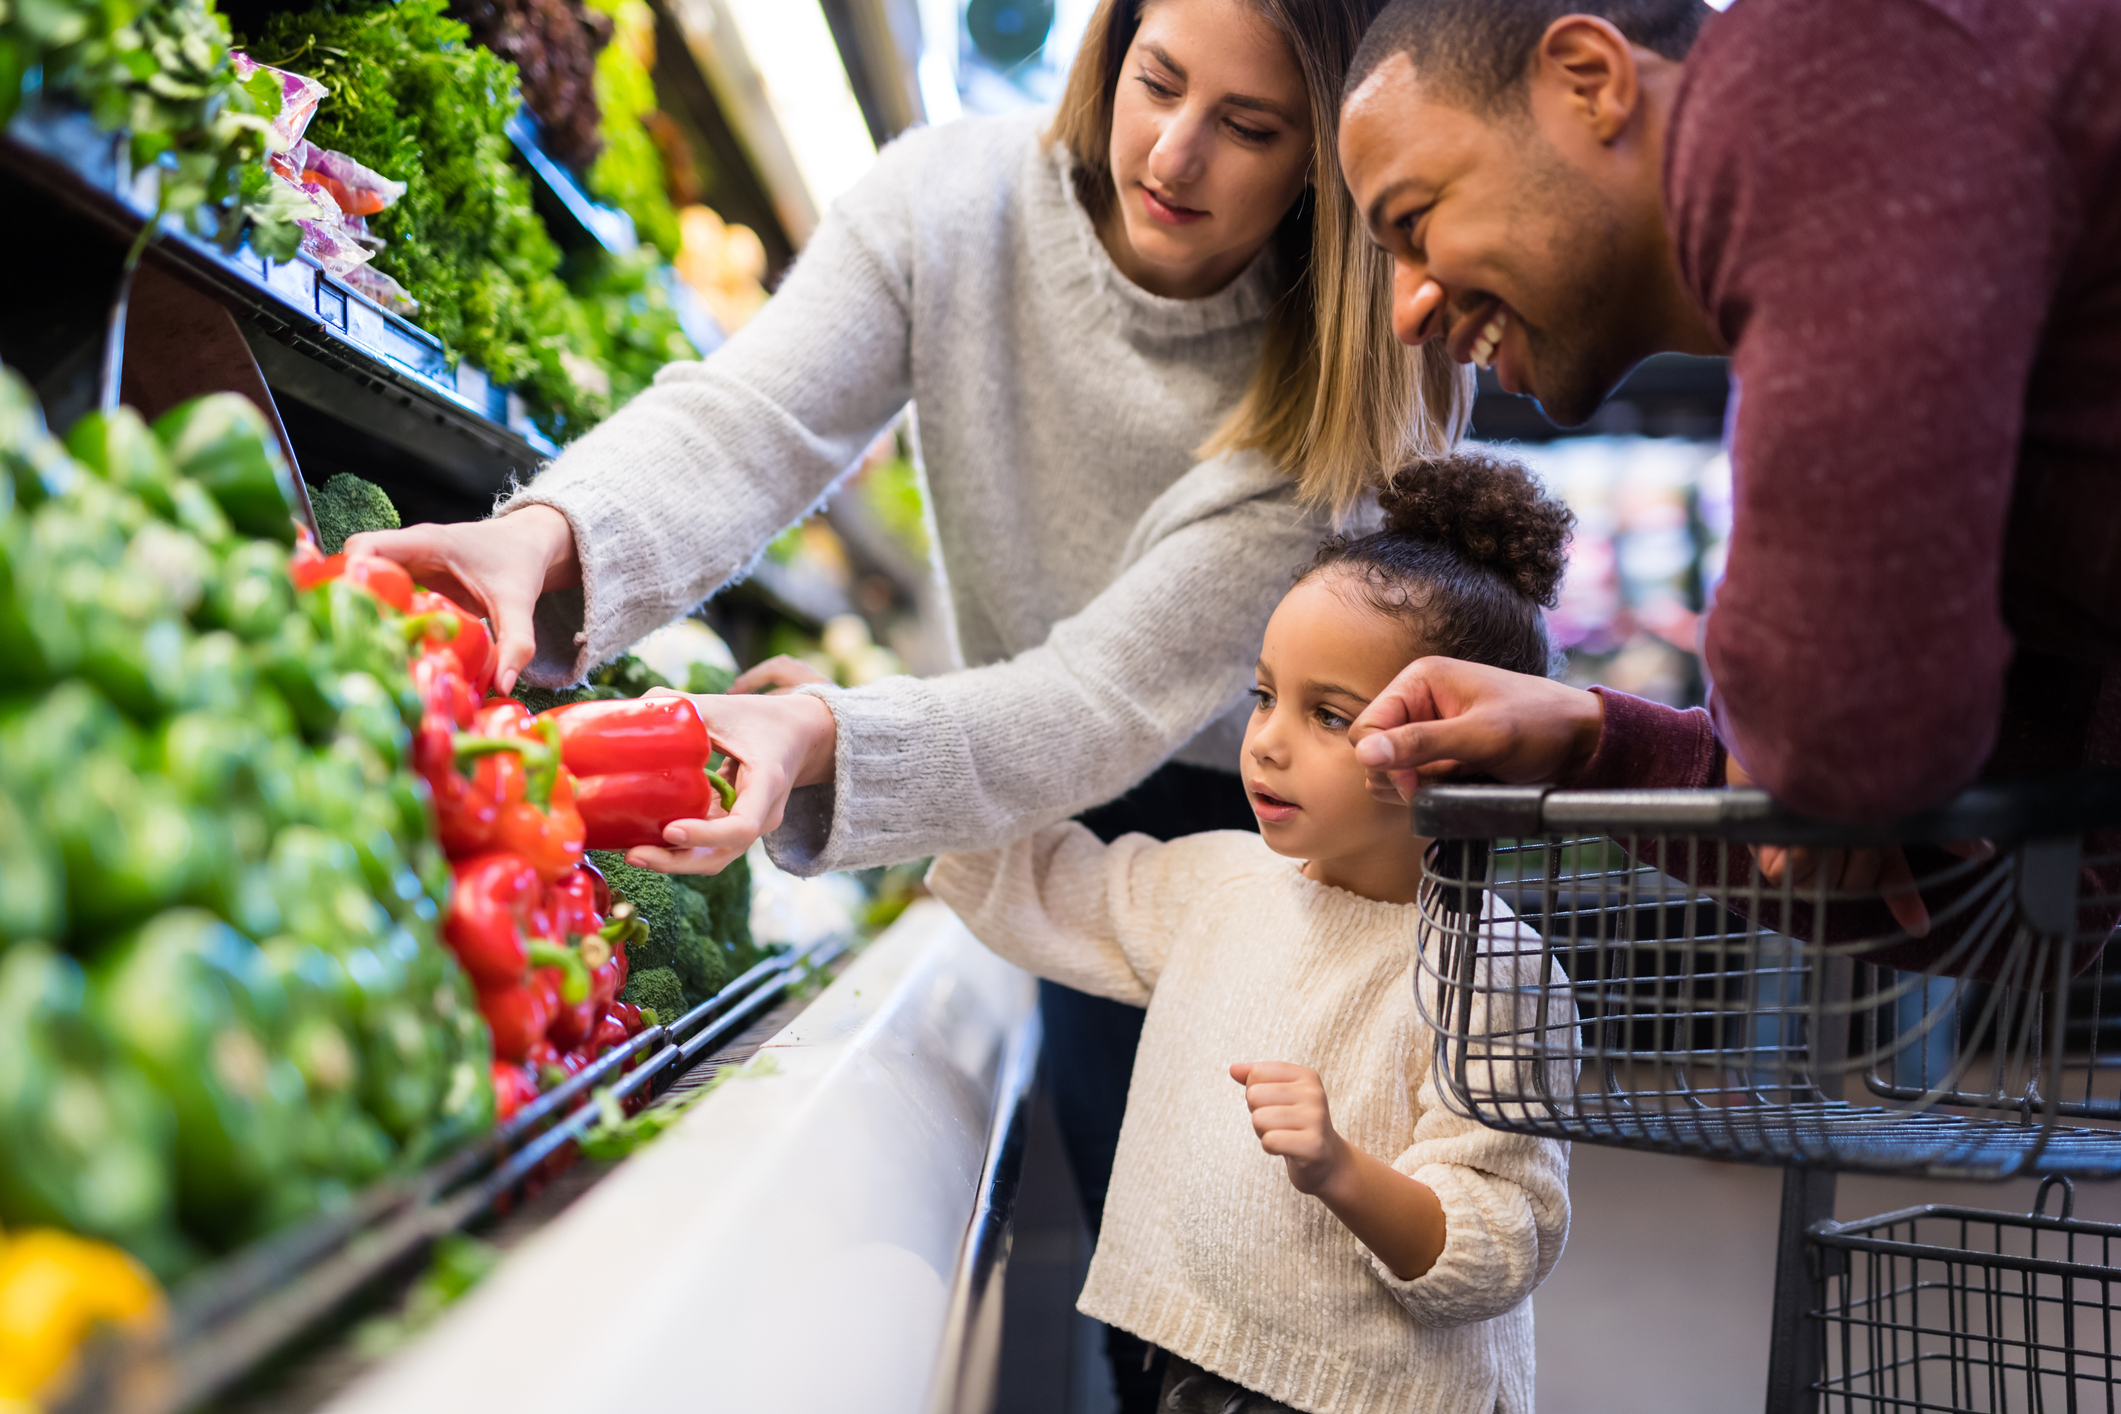 How to Avoid Impulse Buying at the Grocery Store